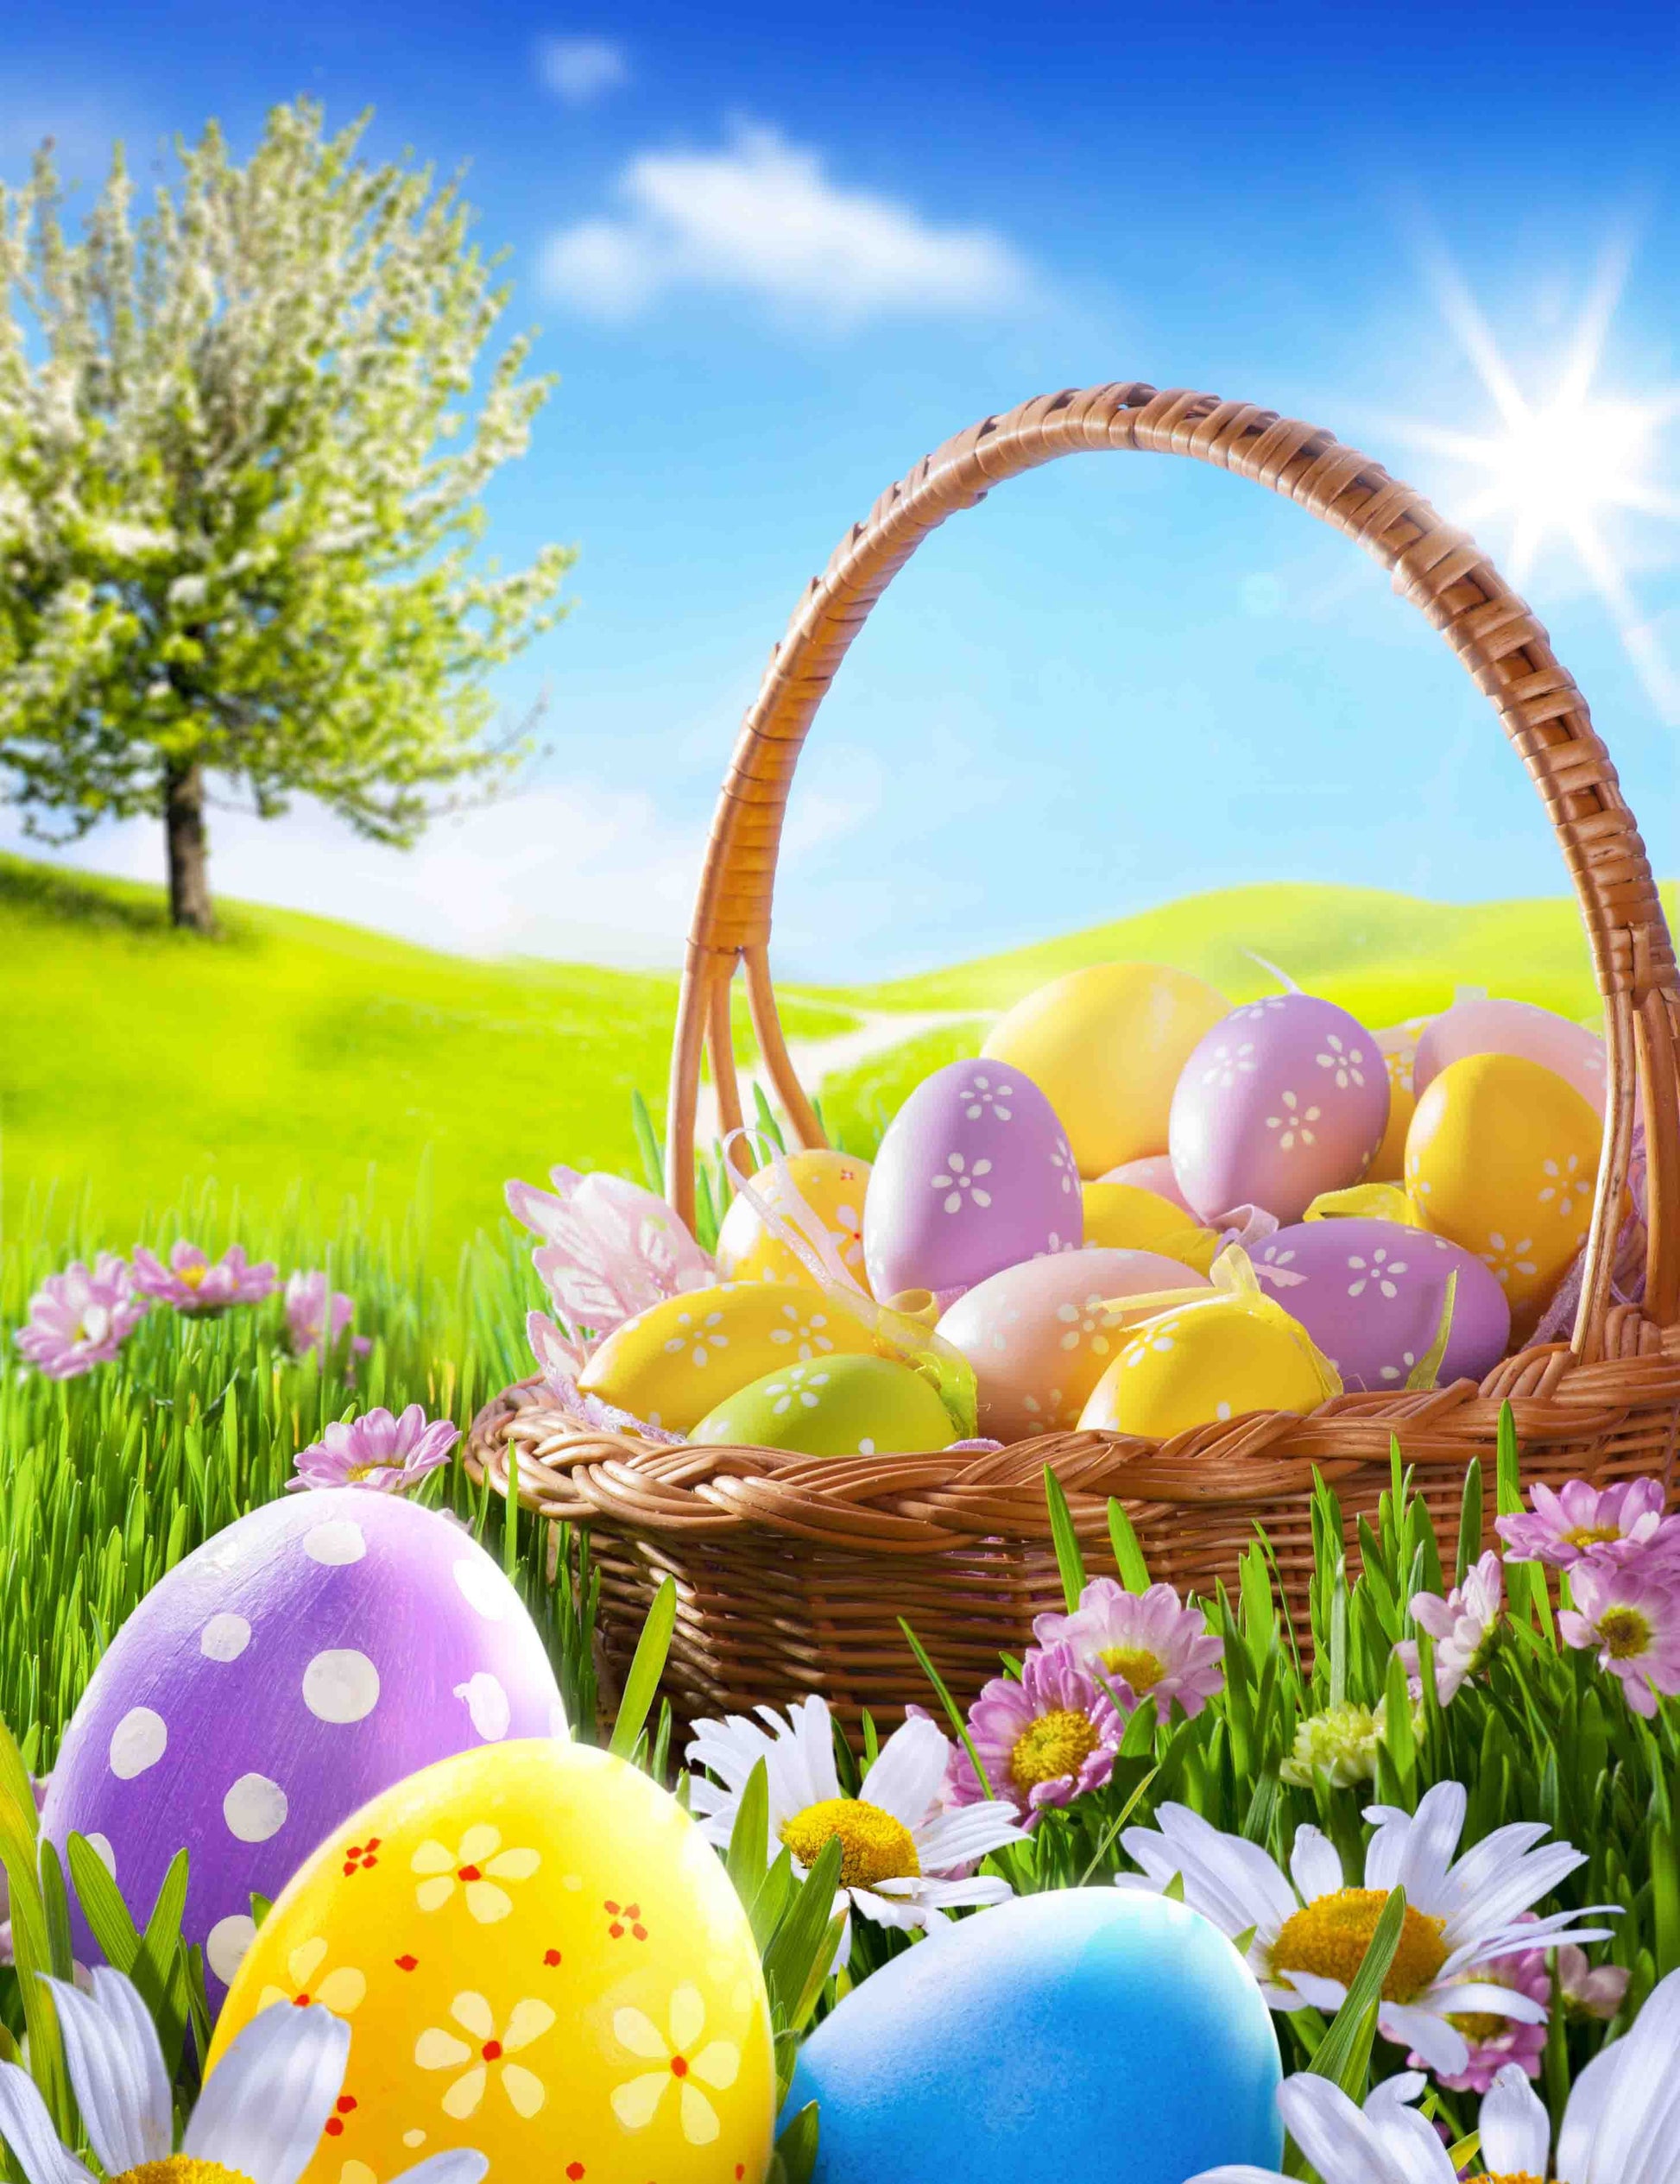 Printed Easter Eggs Meadow And Sunlight Background Photography Shopbackdrop